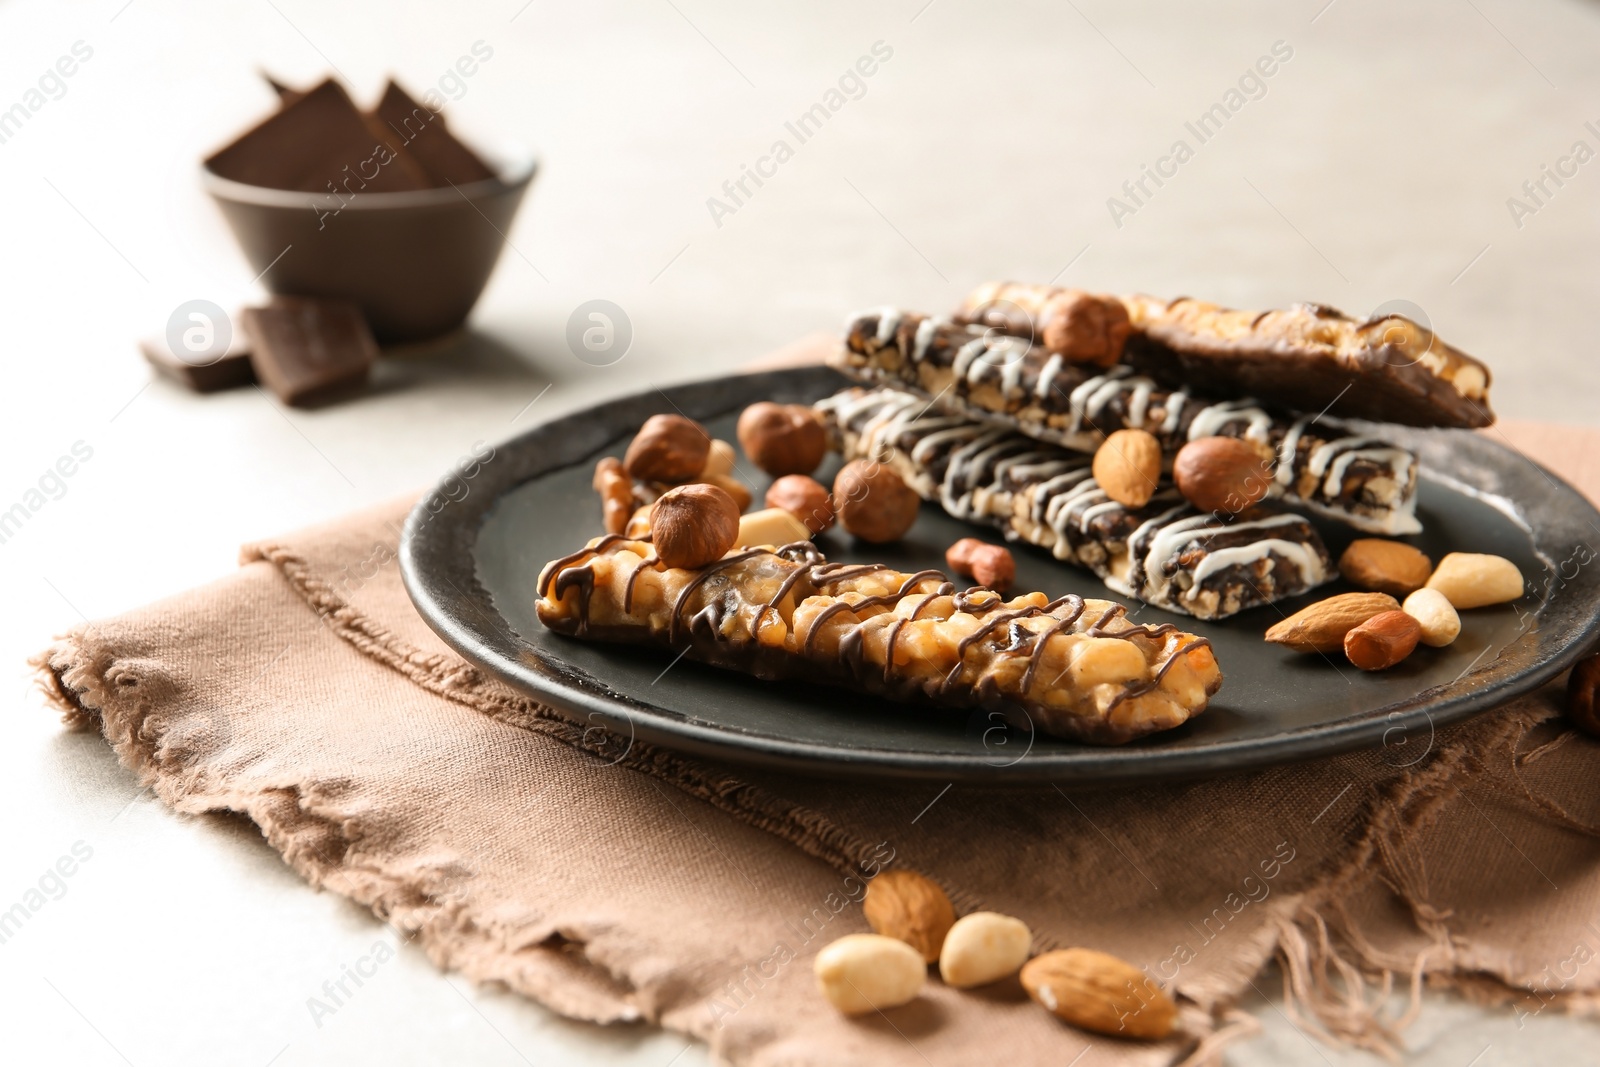 Photo of Homemade grain cereal bars with chocolate and nuts on plate